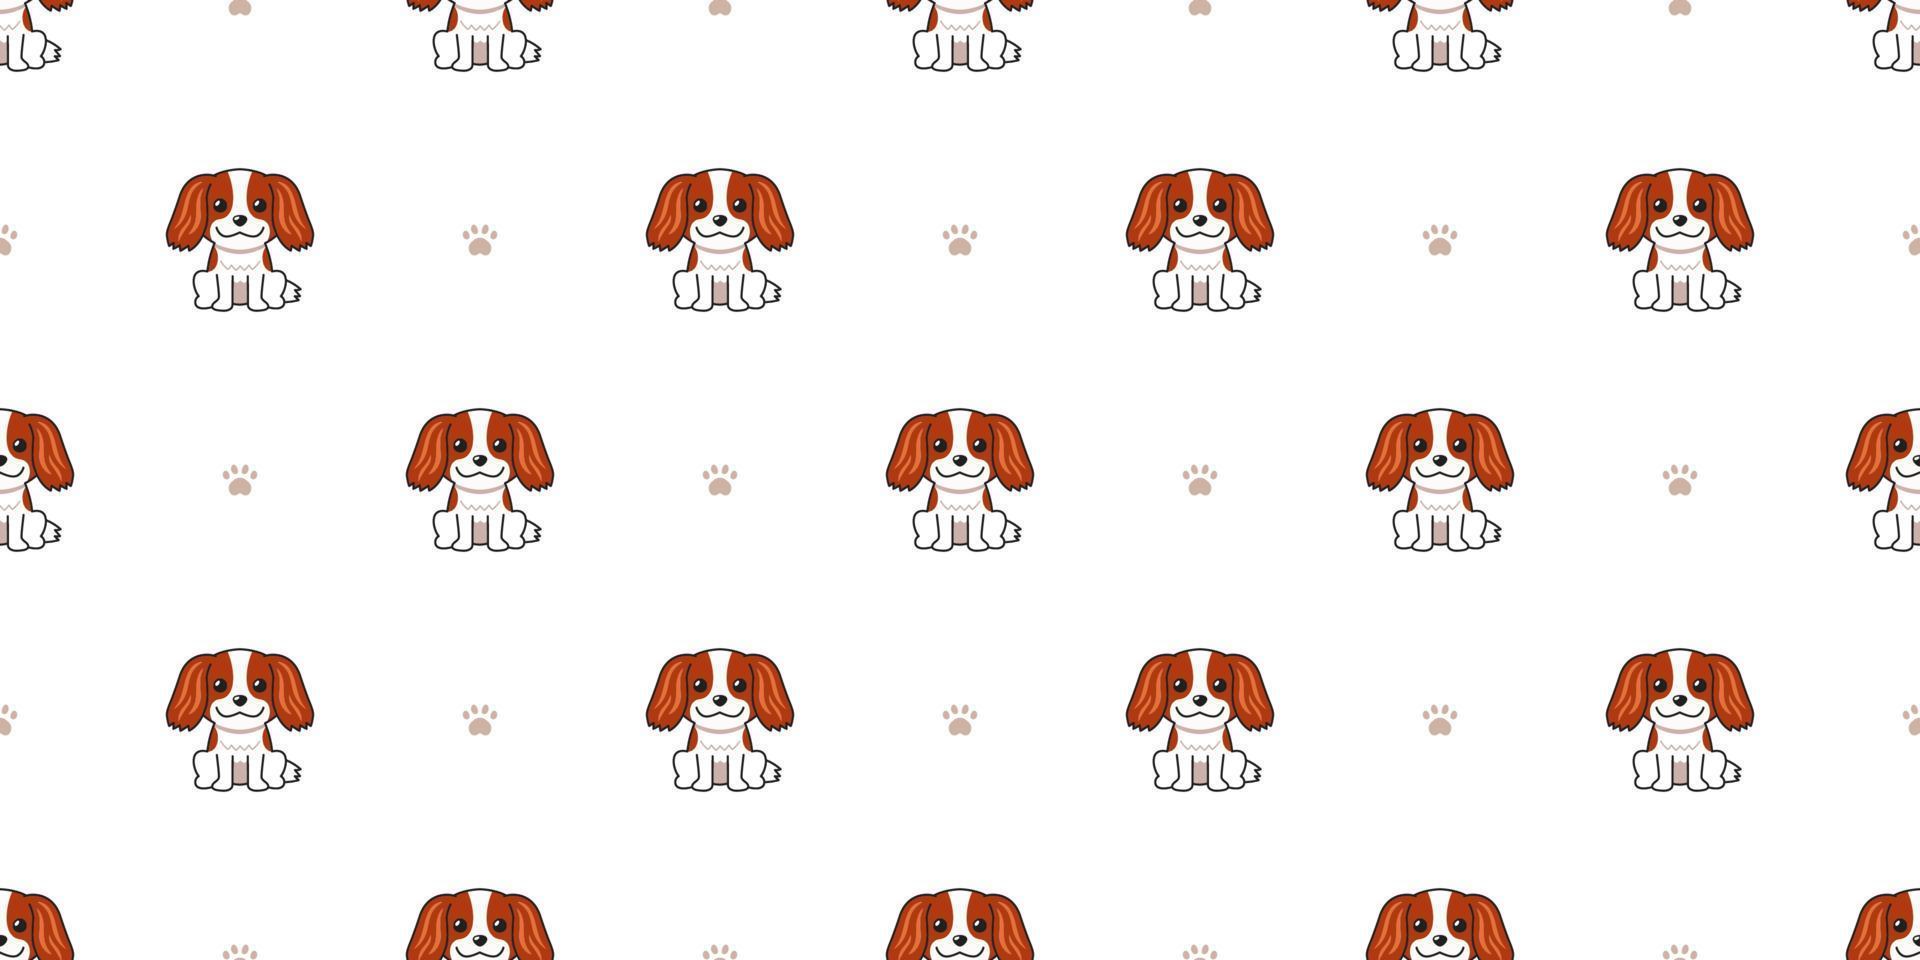 Cartoon character cavalier king charles spaniel dog seamless pattern background vector